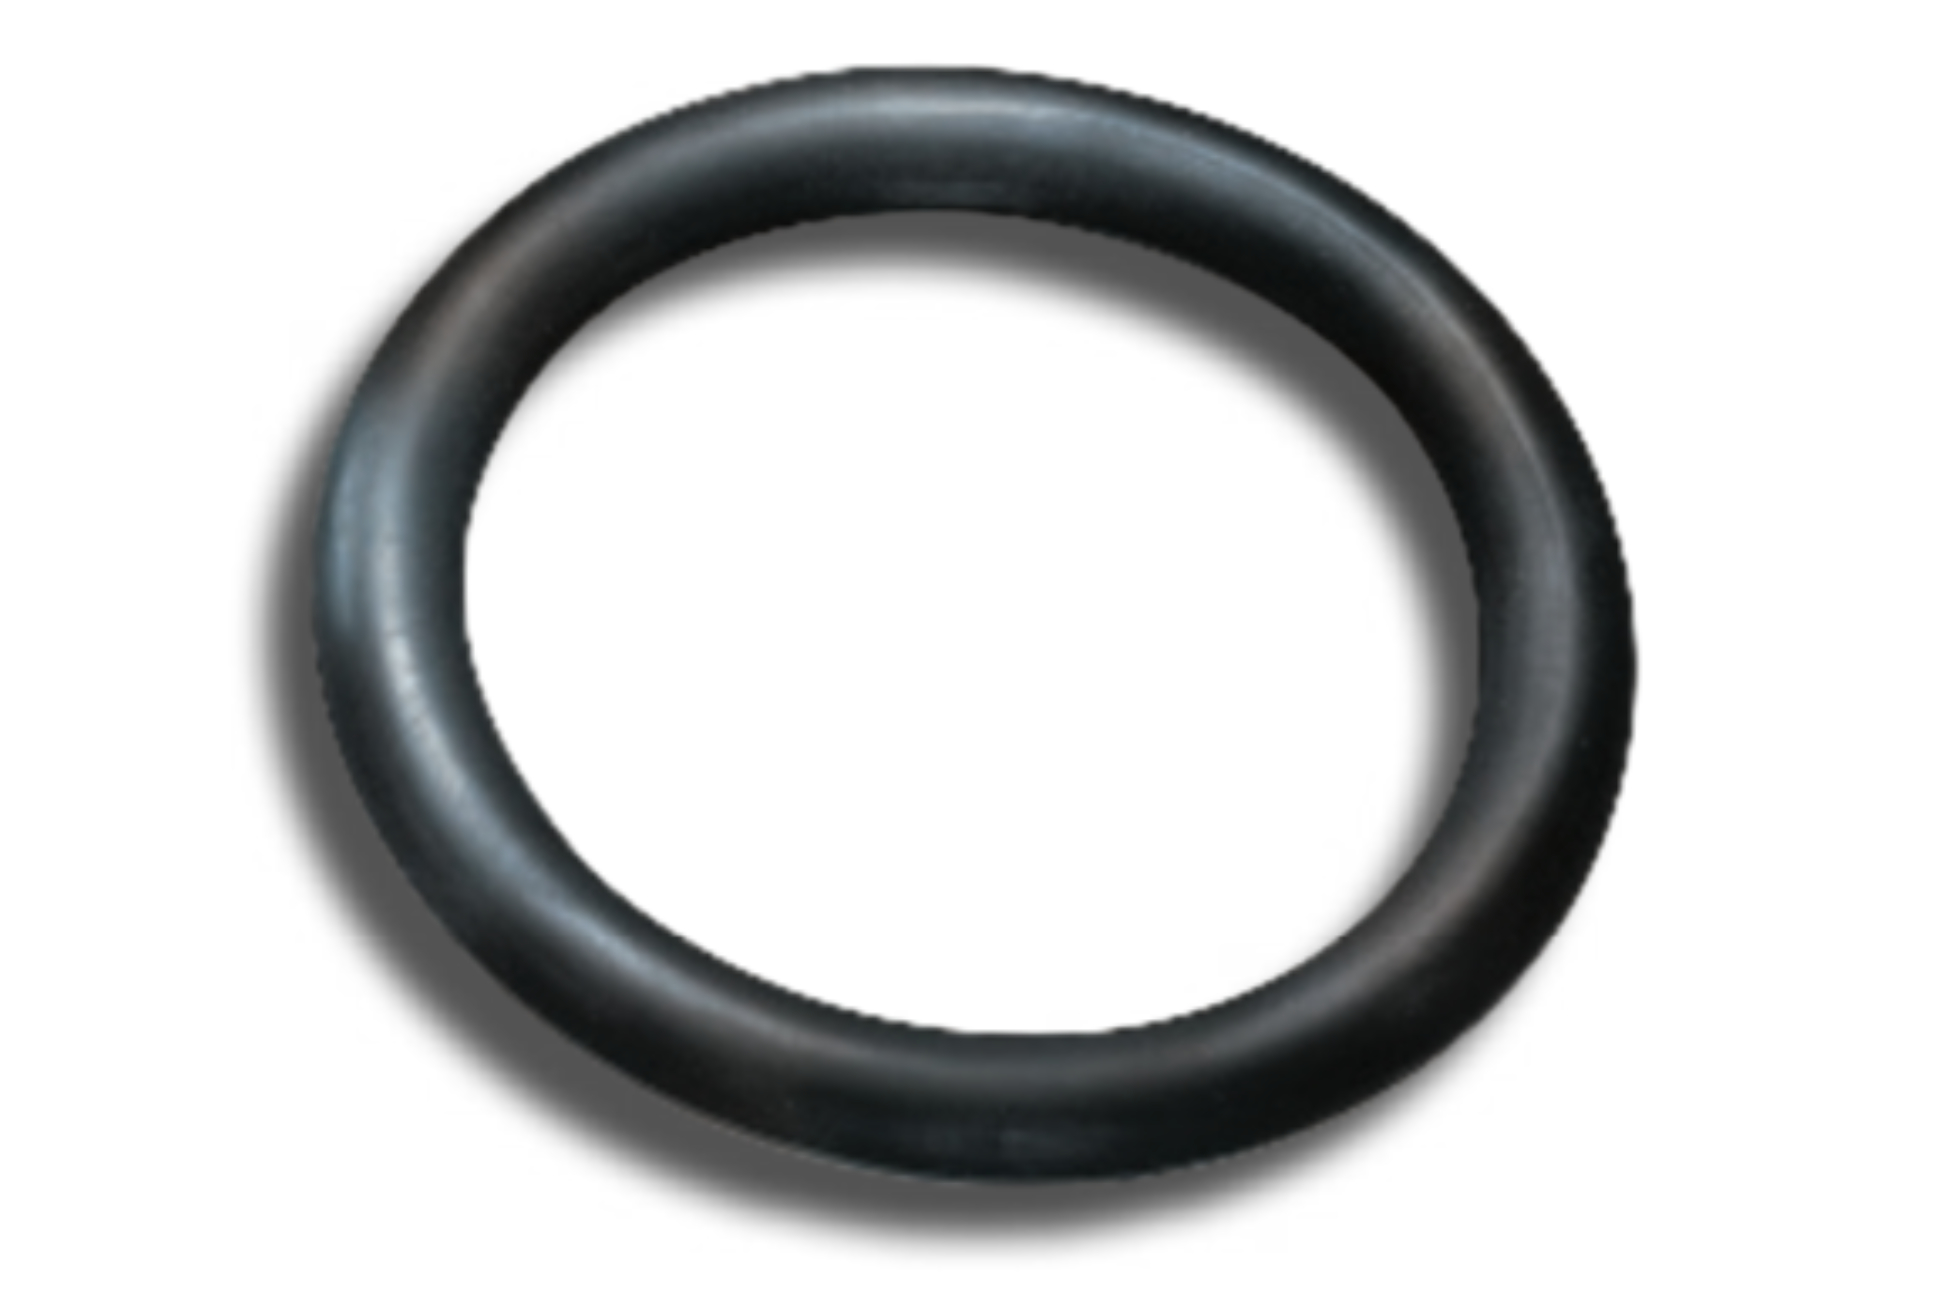 RX Ring Type Joint Gasket | BX, Oval, Octagonal RTJ Gasket - Sunshine